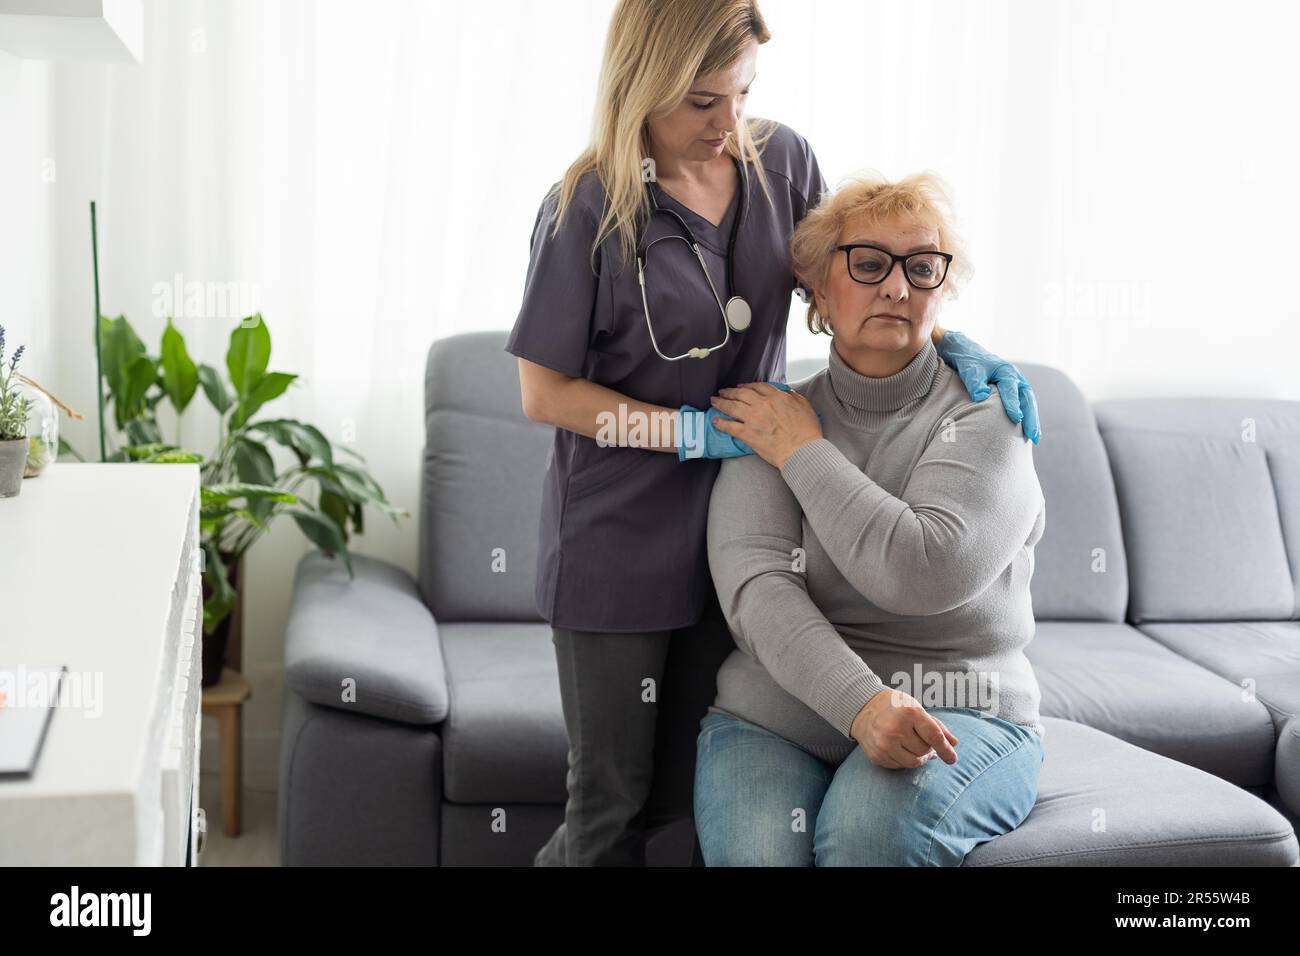 Caring young nurse doctor carer helping holding hands of happy disabled handicapped or injured old adult elder woman having disability health problem Stock Photo